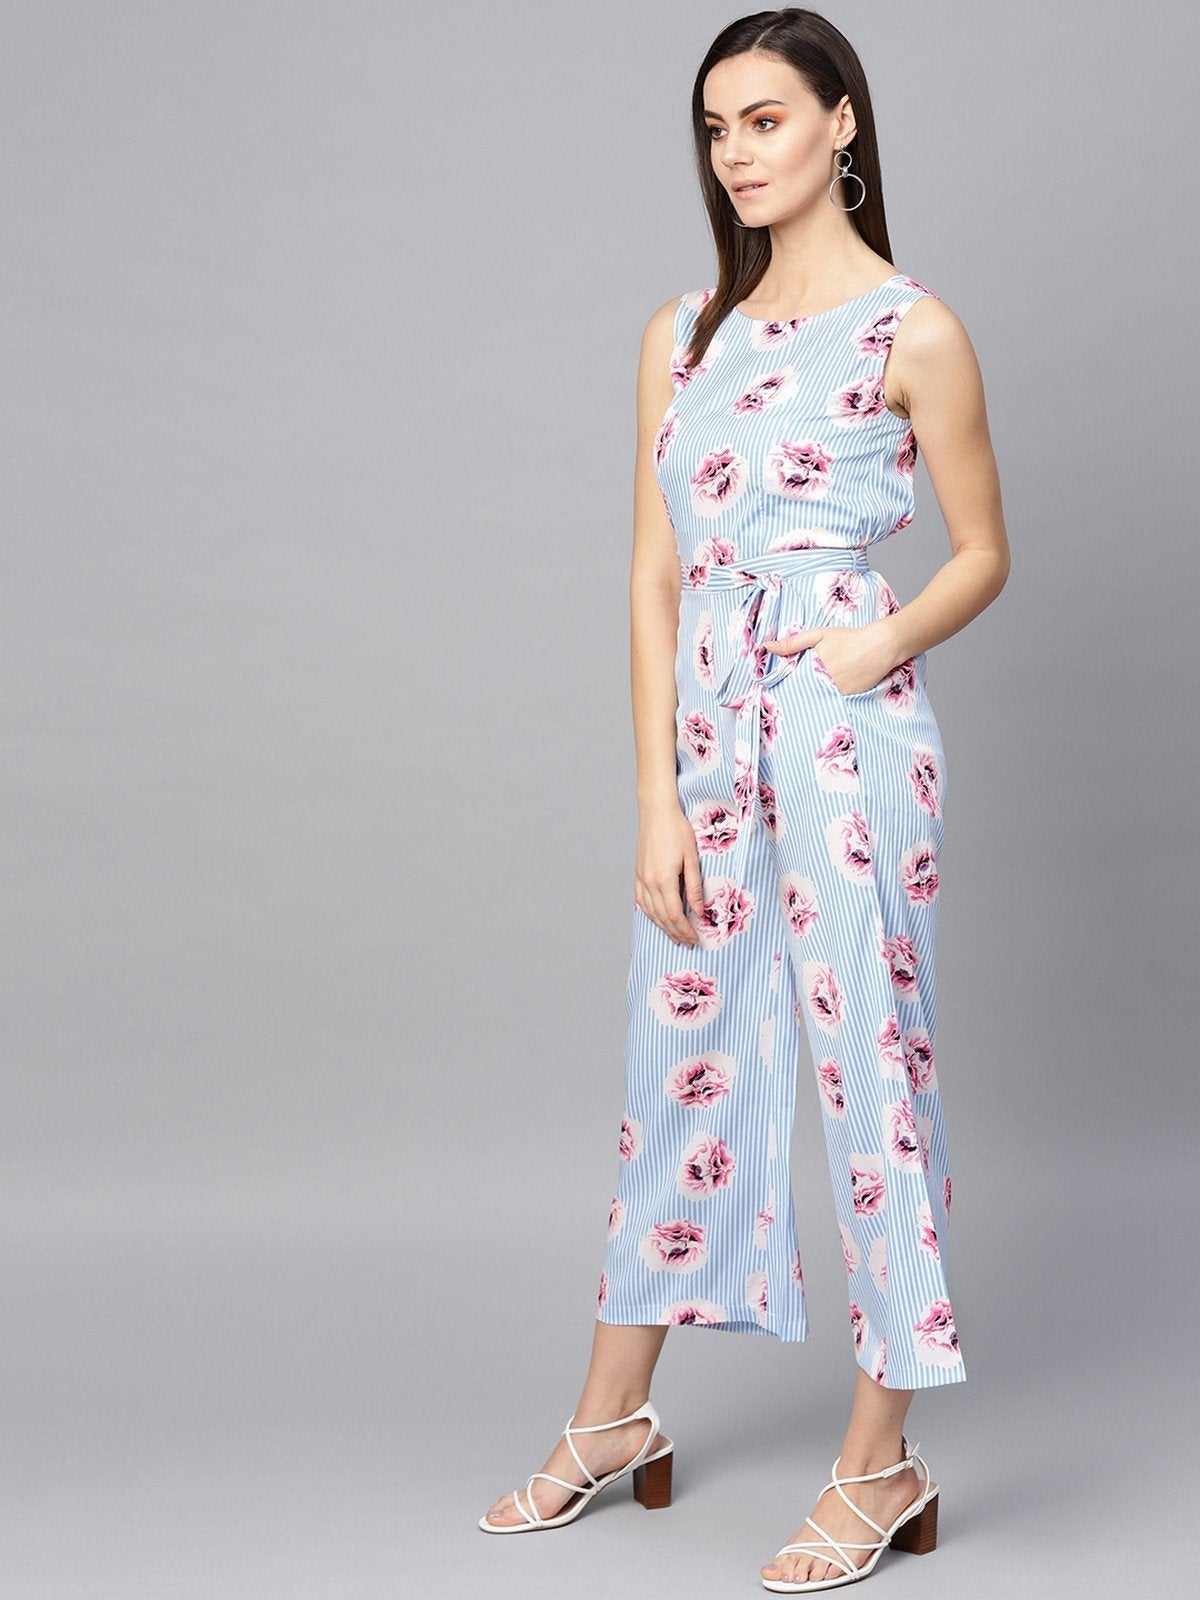 Women's Stripes And Floral Printed Jumpsuit - Pannkh